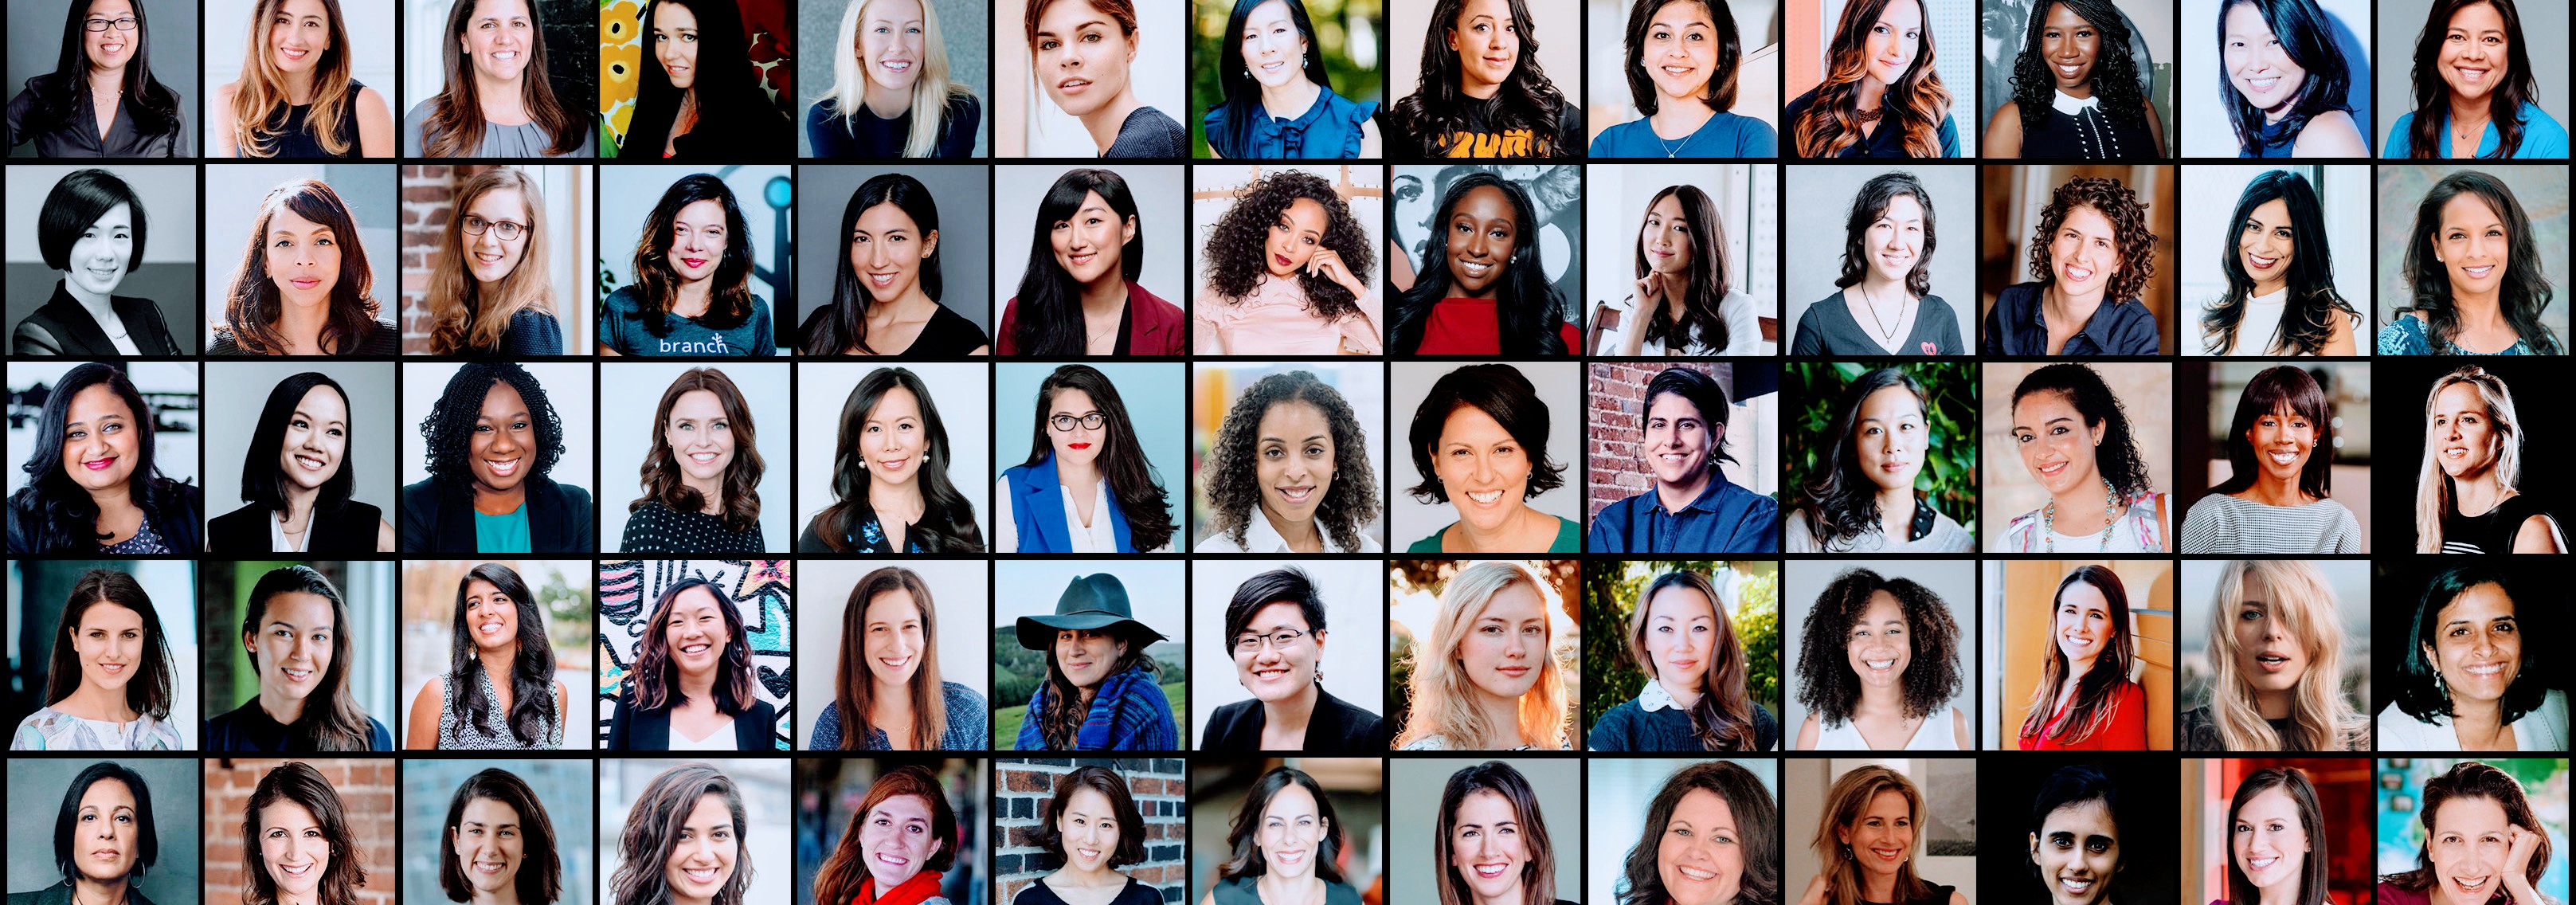 Female-founded startups landed more deals globally in 2019 than ever before